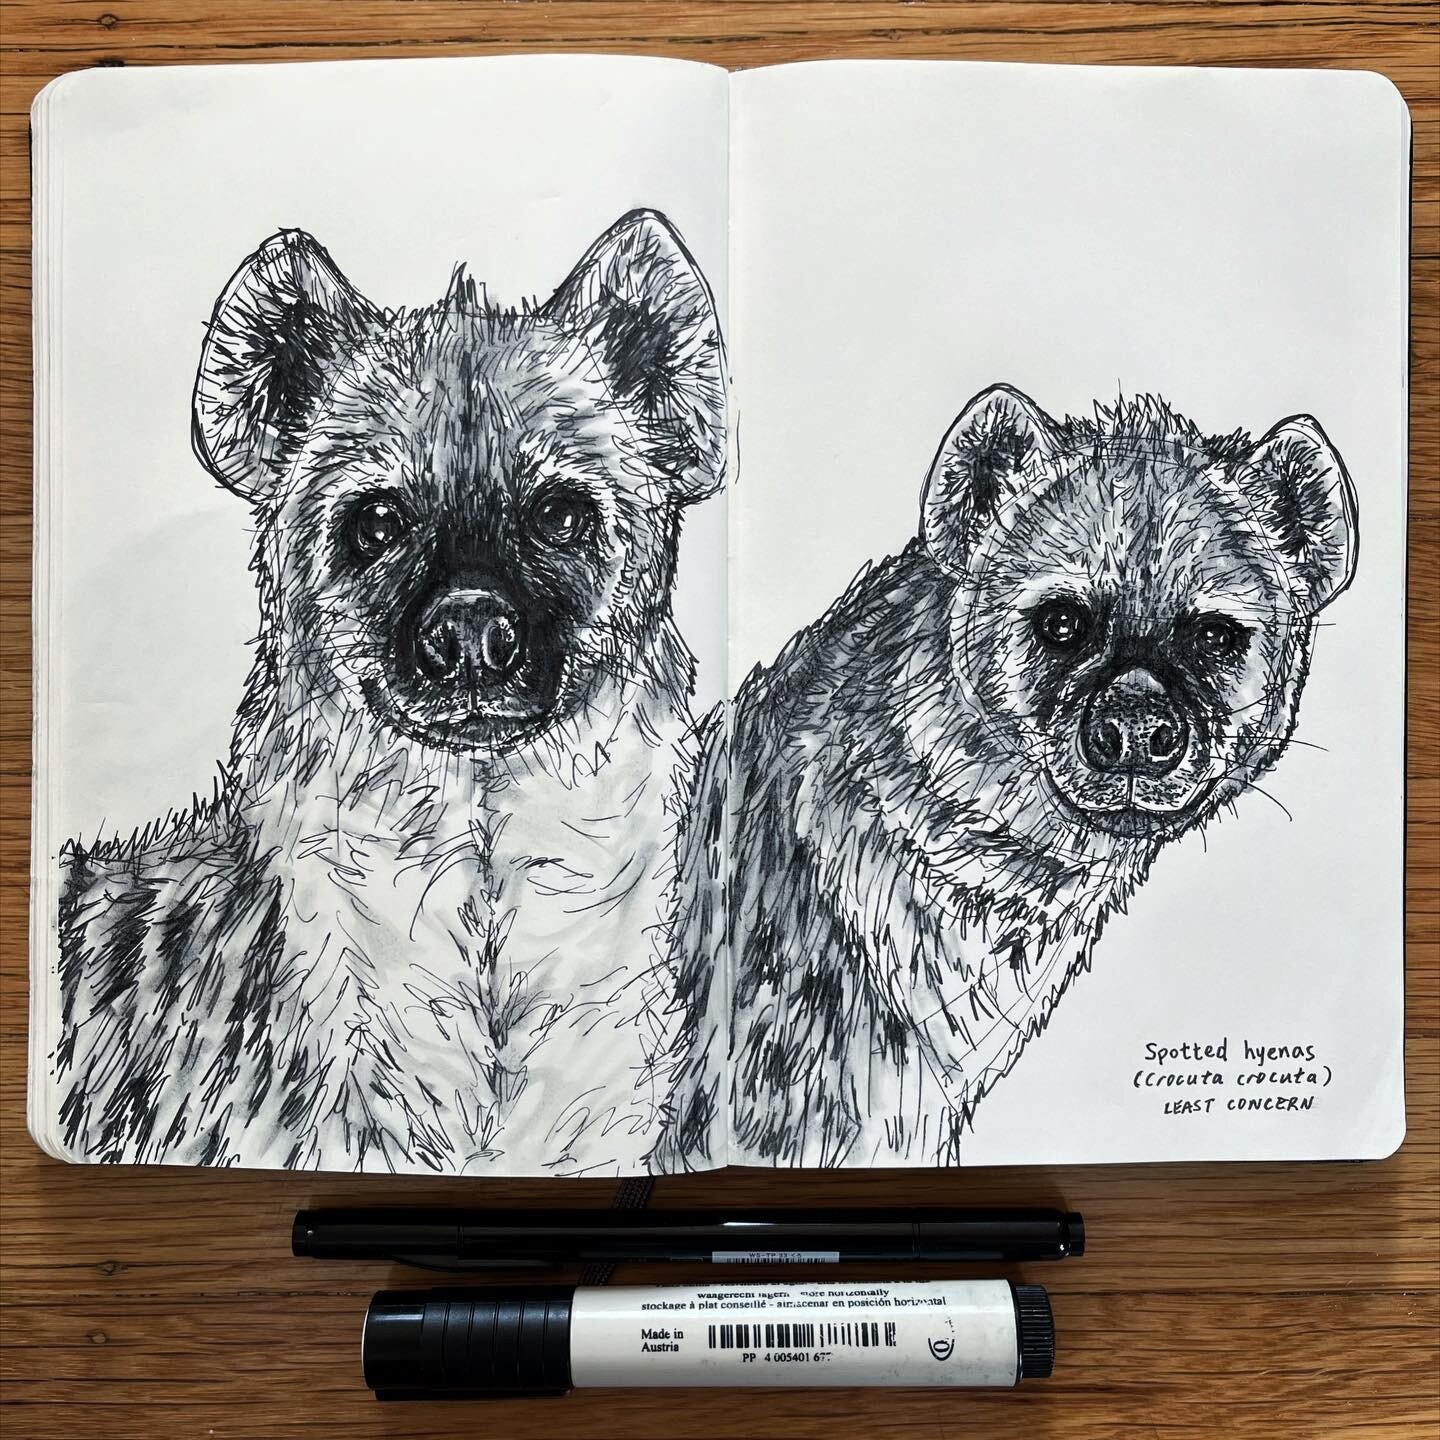 Quick n&rsquo; loose pen sketch of some spotted hyenas from @joelsartore #photoark book

Spotted hyenas (Crocuta crocuta) - least concern

Spotted hyenas, although seemingly canid in their appearance, are one of four species within the family Hyaenid